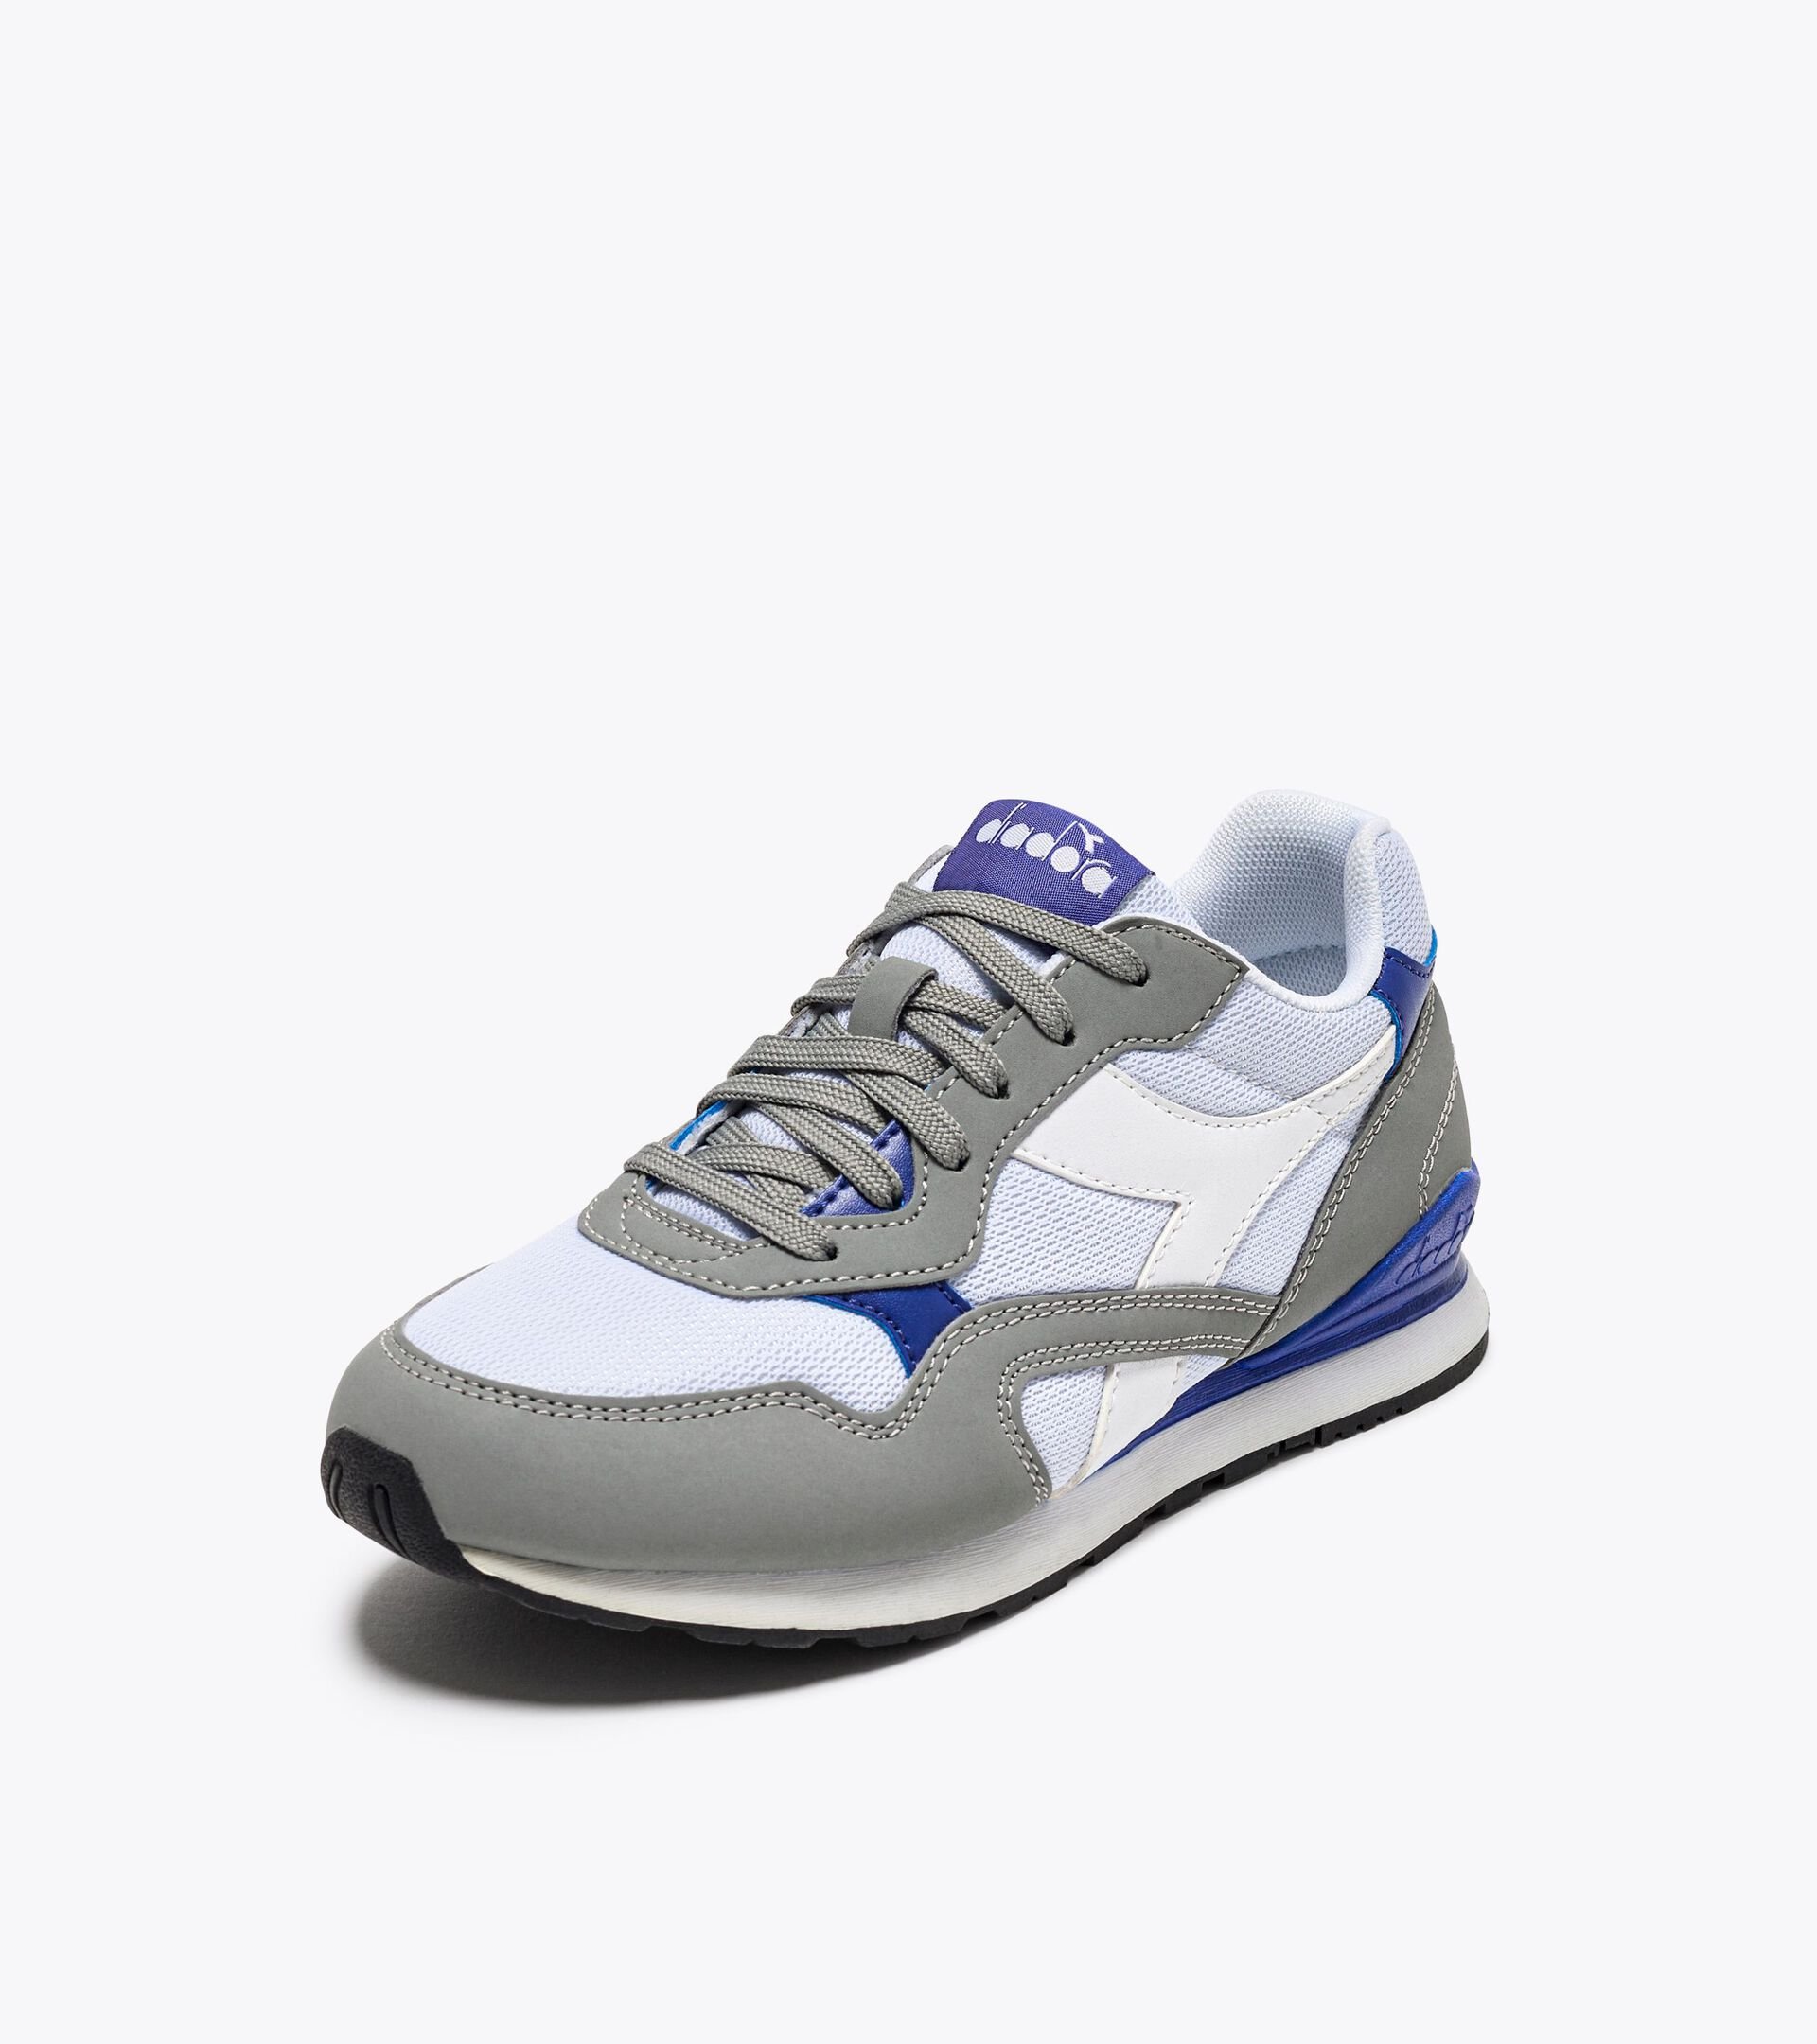 Sports shoes - Youth 8-16 years N.92 GS ULTIMATE GRY/SURF THE WEB/ART - Diadora